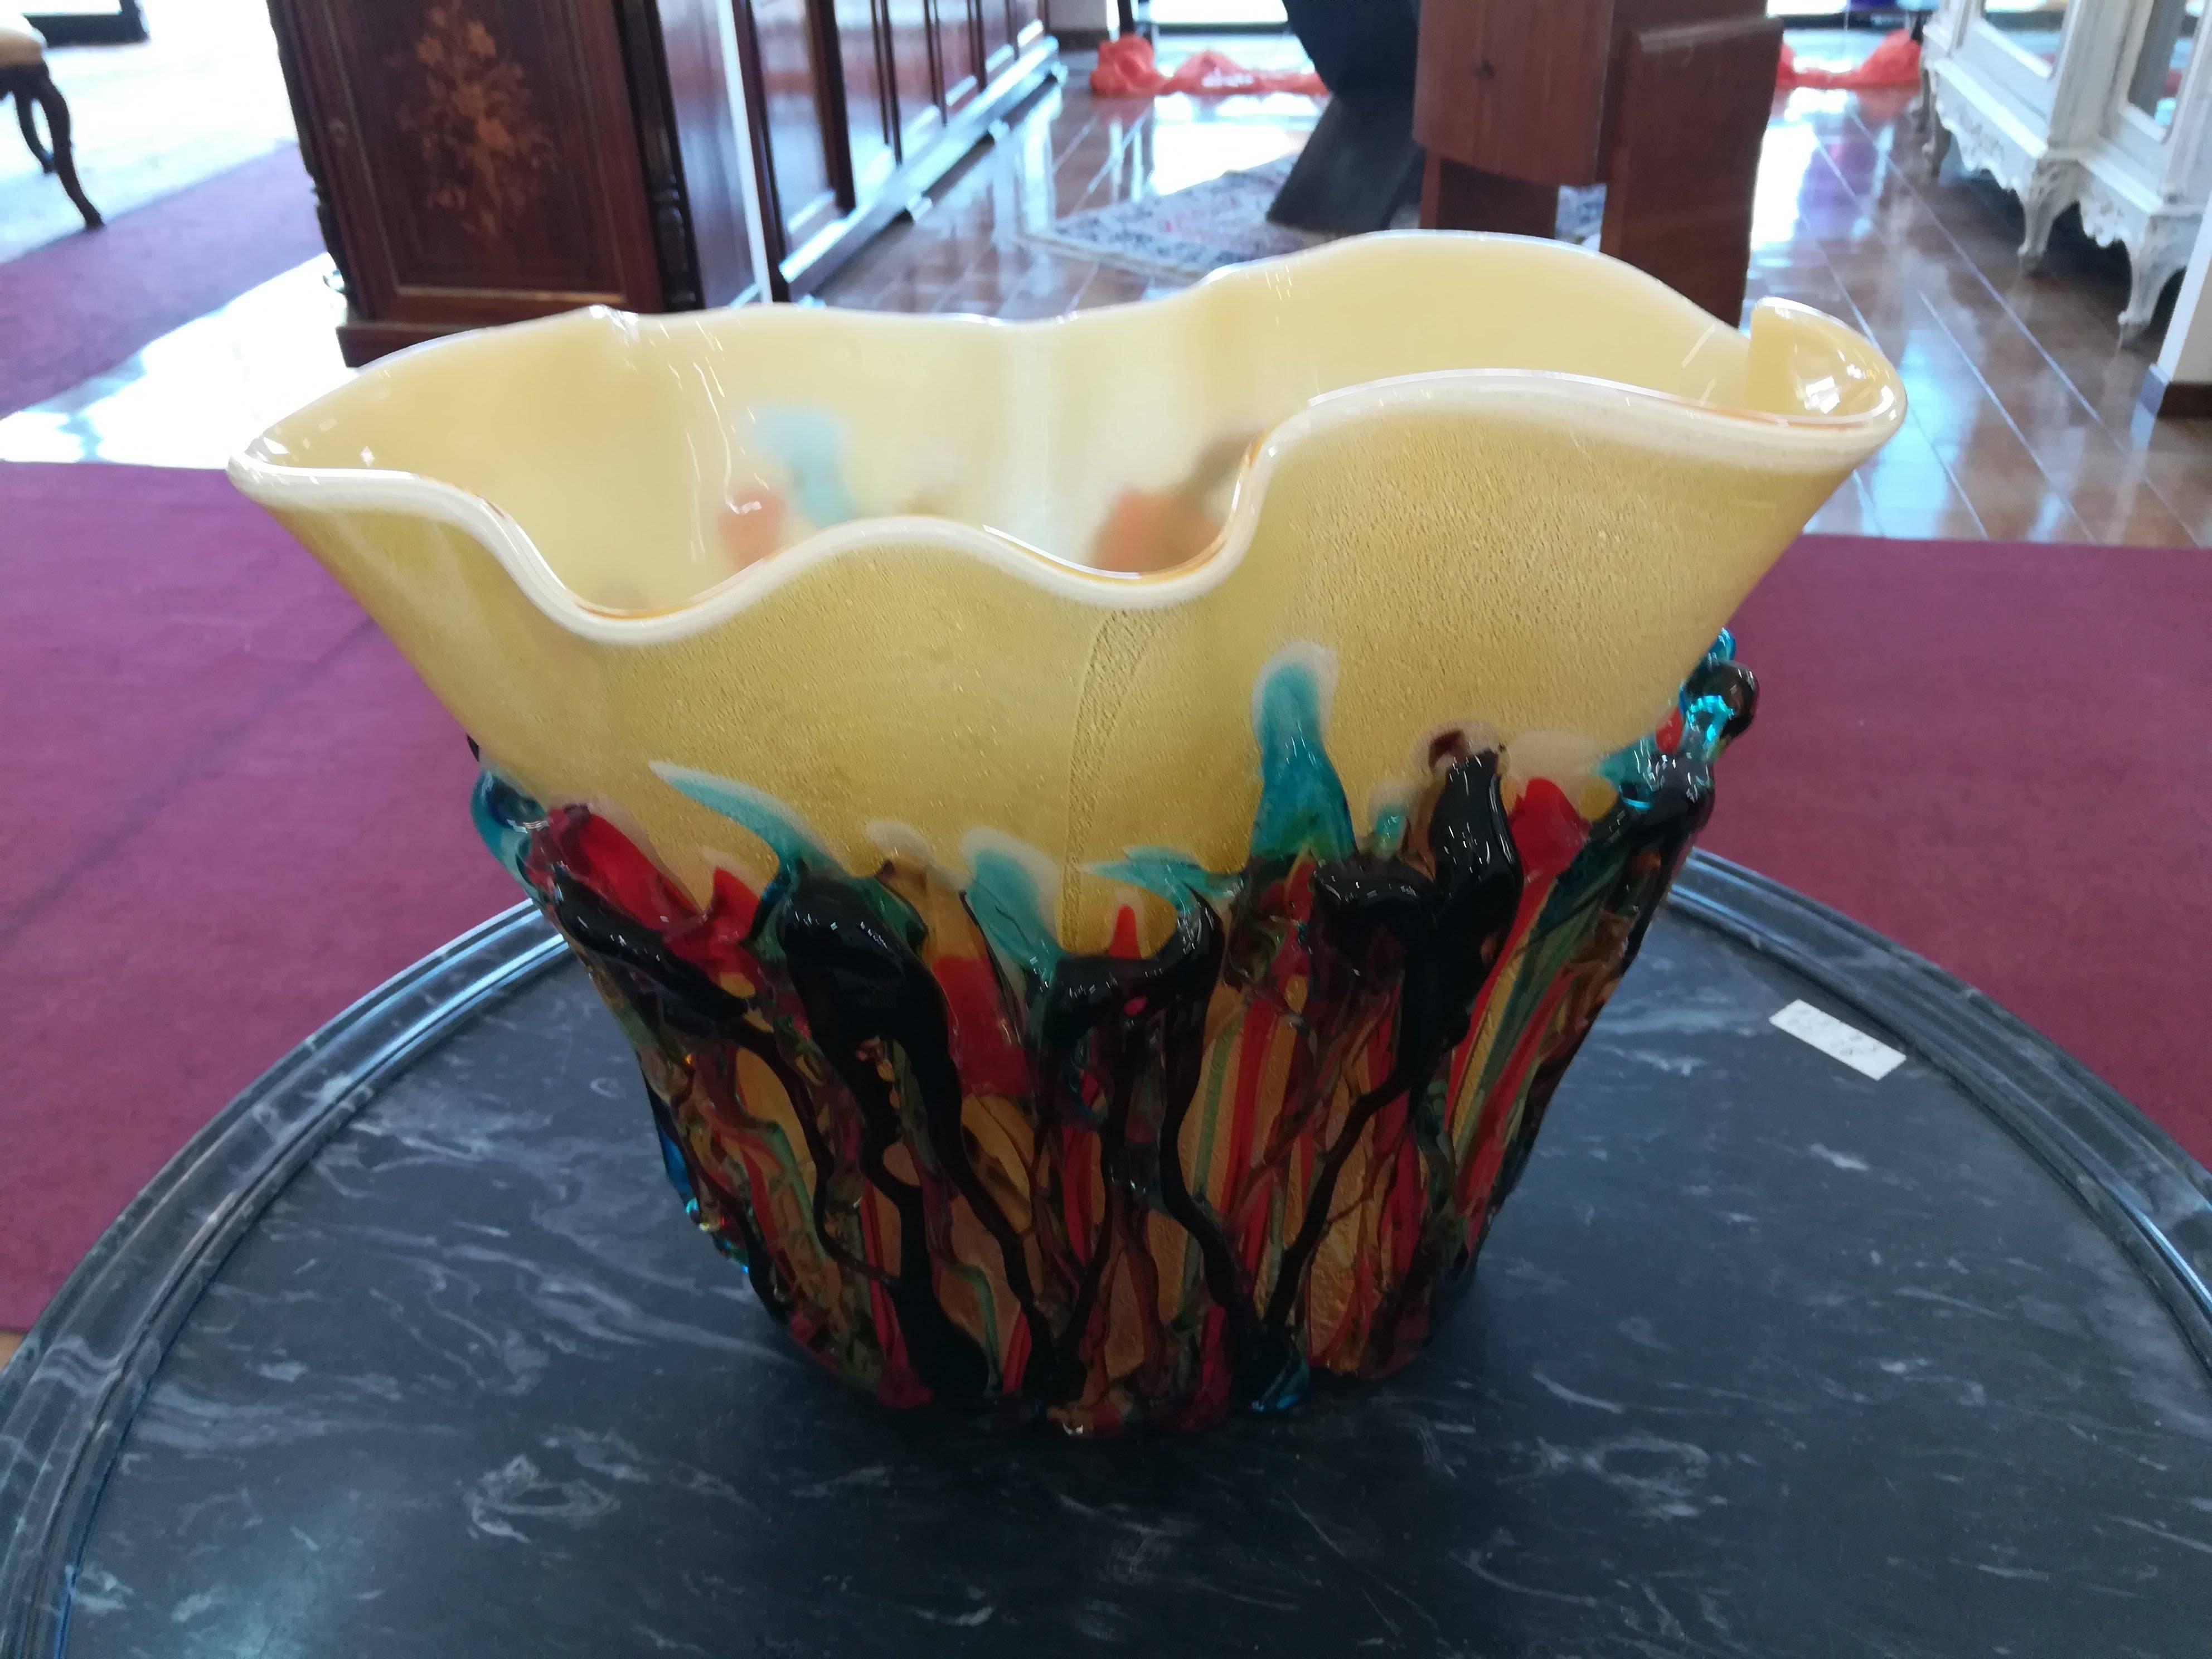 Multicolored Blown Glass Murano Vase In Excellent Condition For Sale In Wyboston Lakes, GB